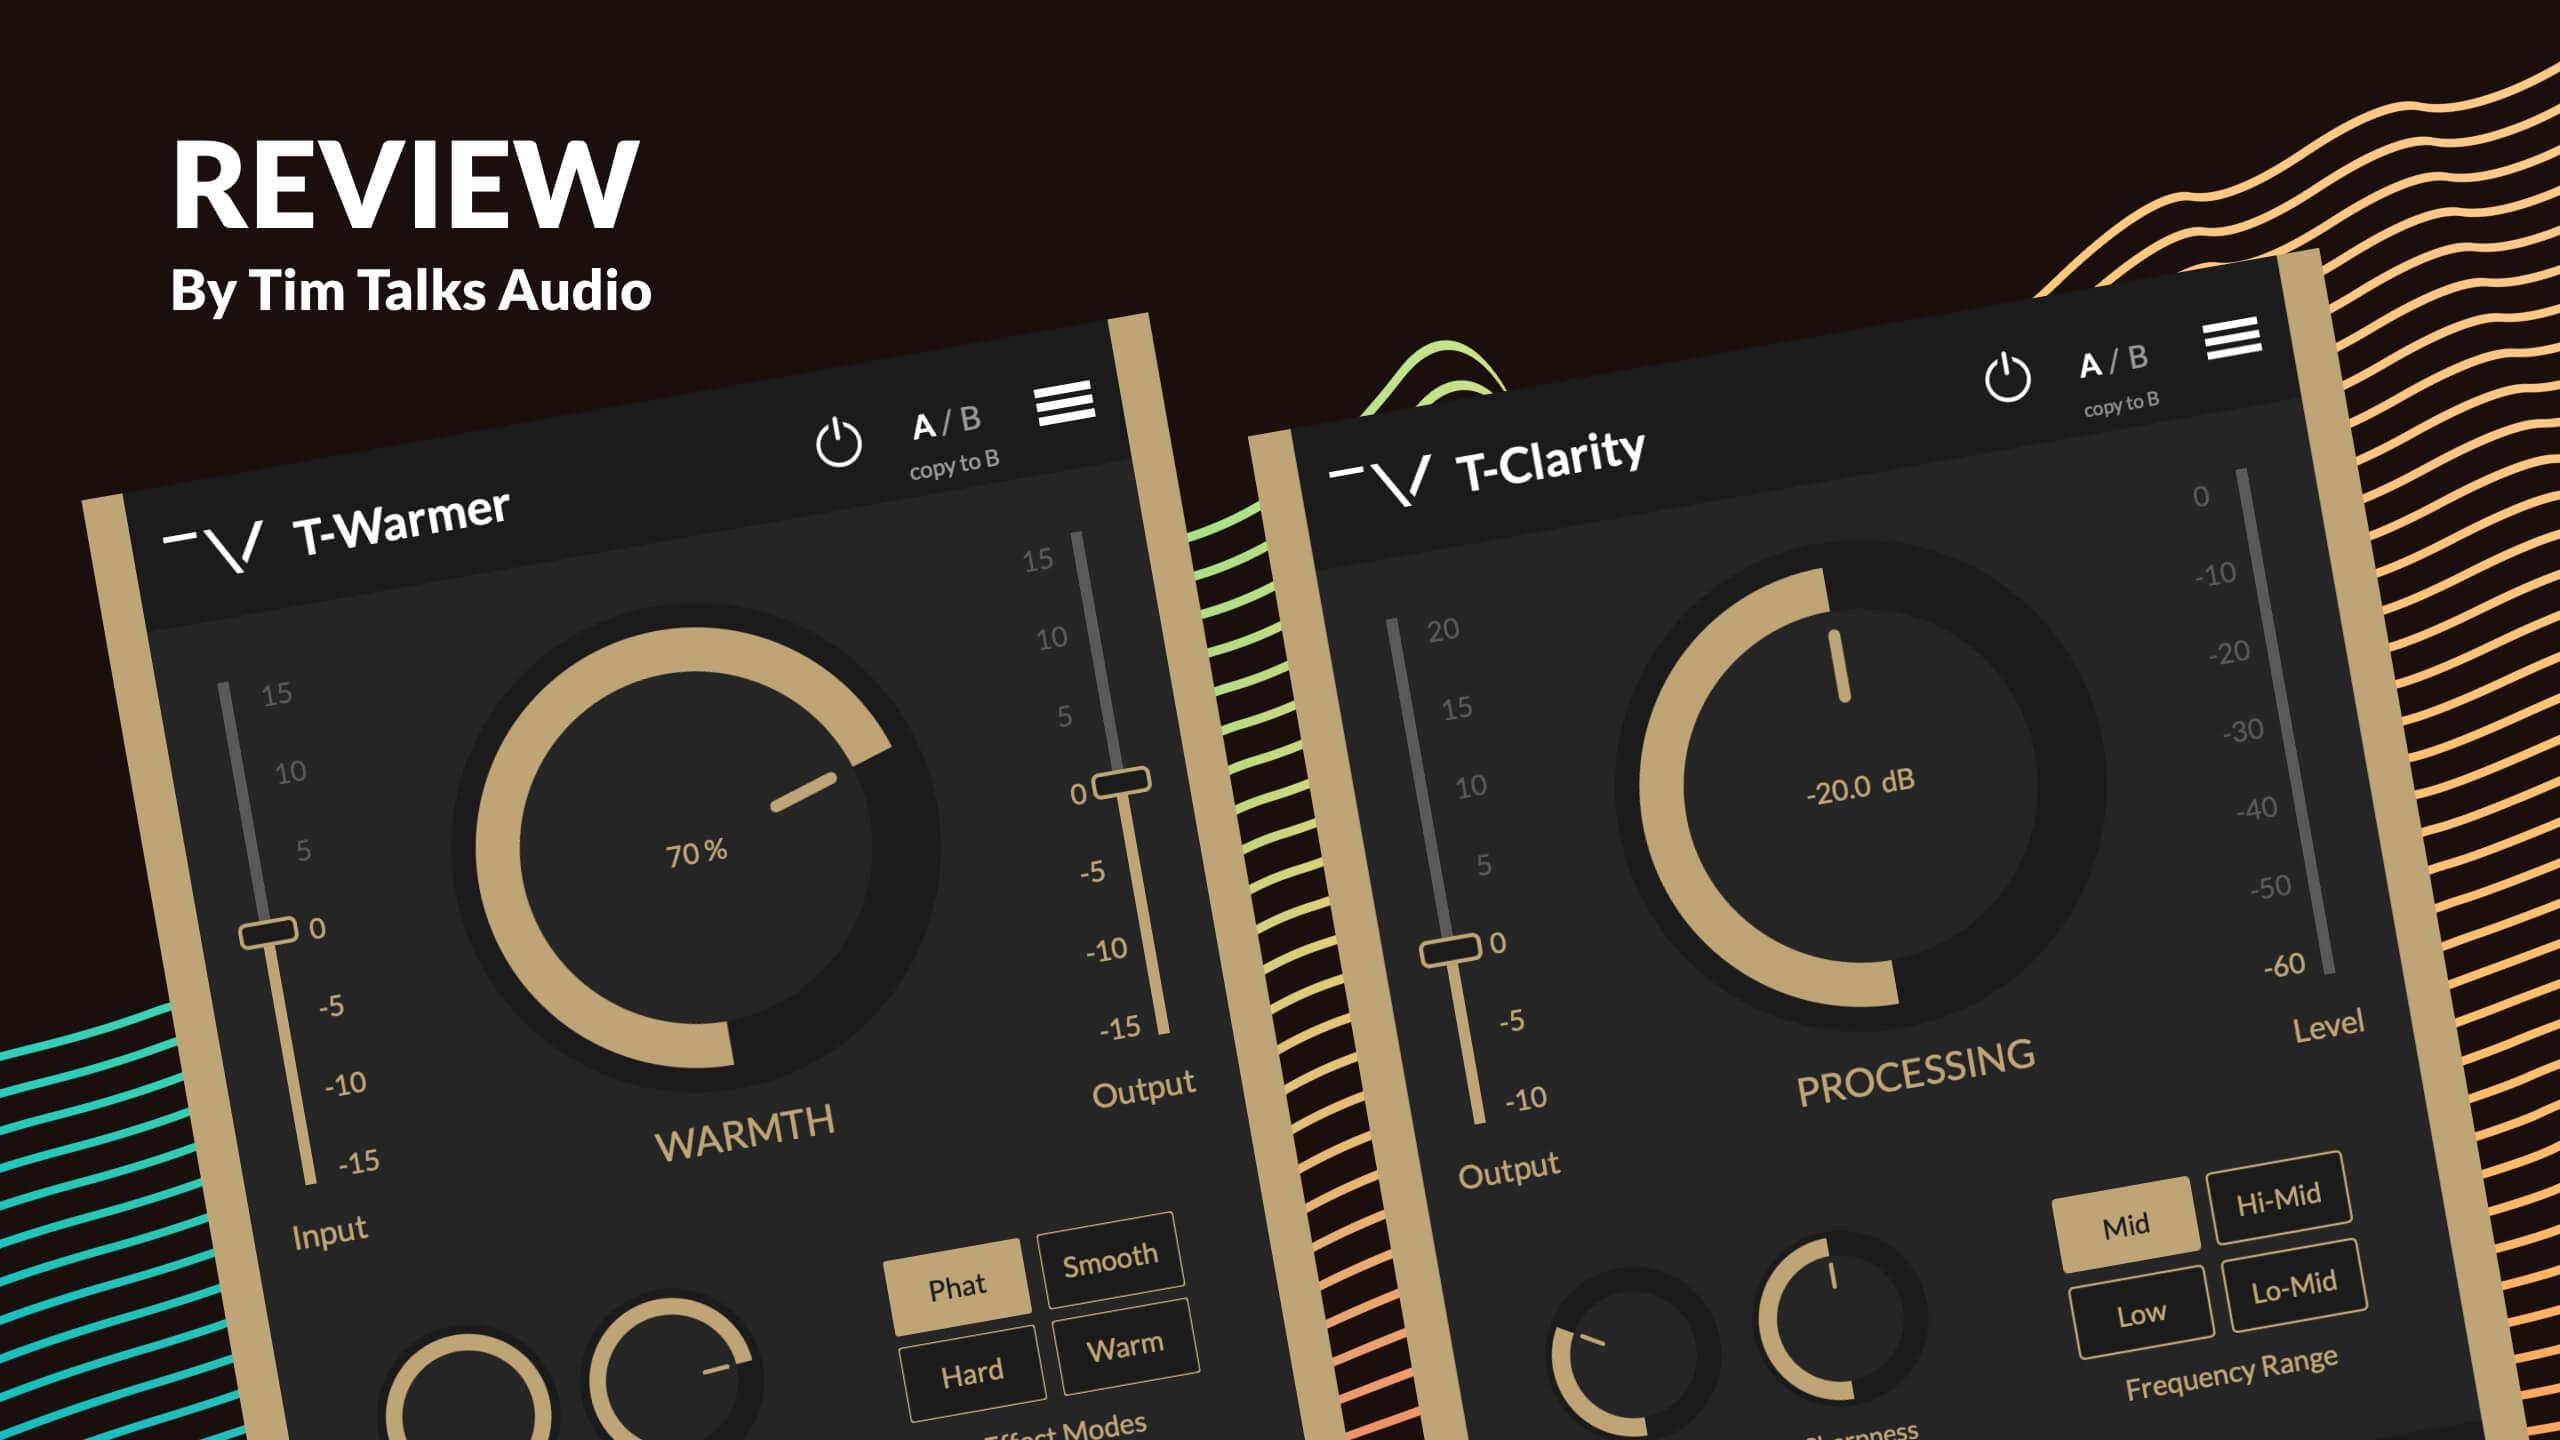 T-Warmer & T-Clarity Reviewed By TimTalksAudio